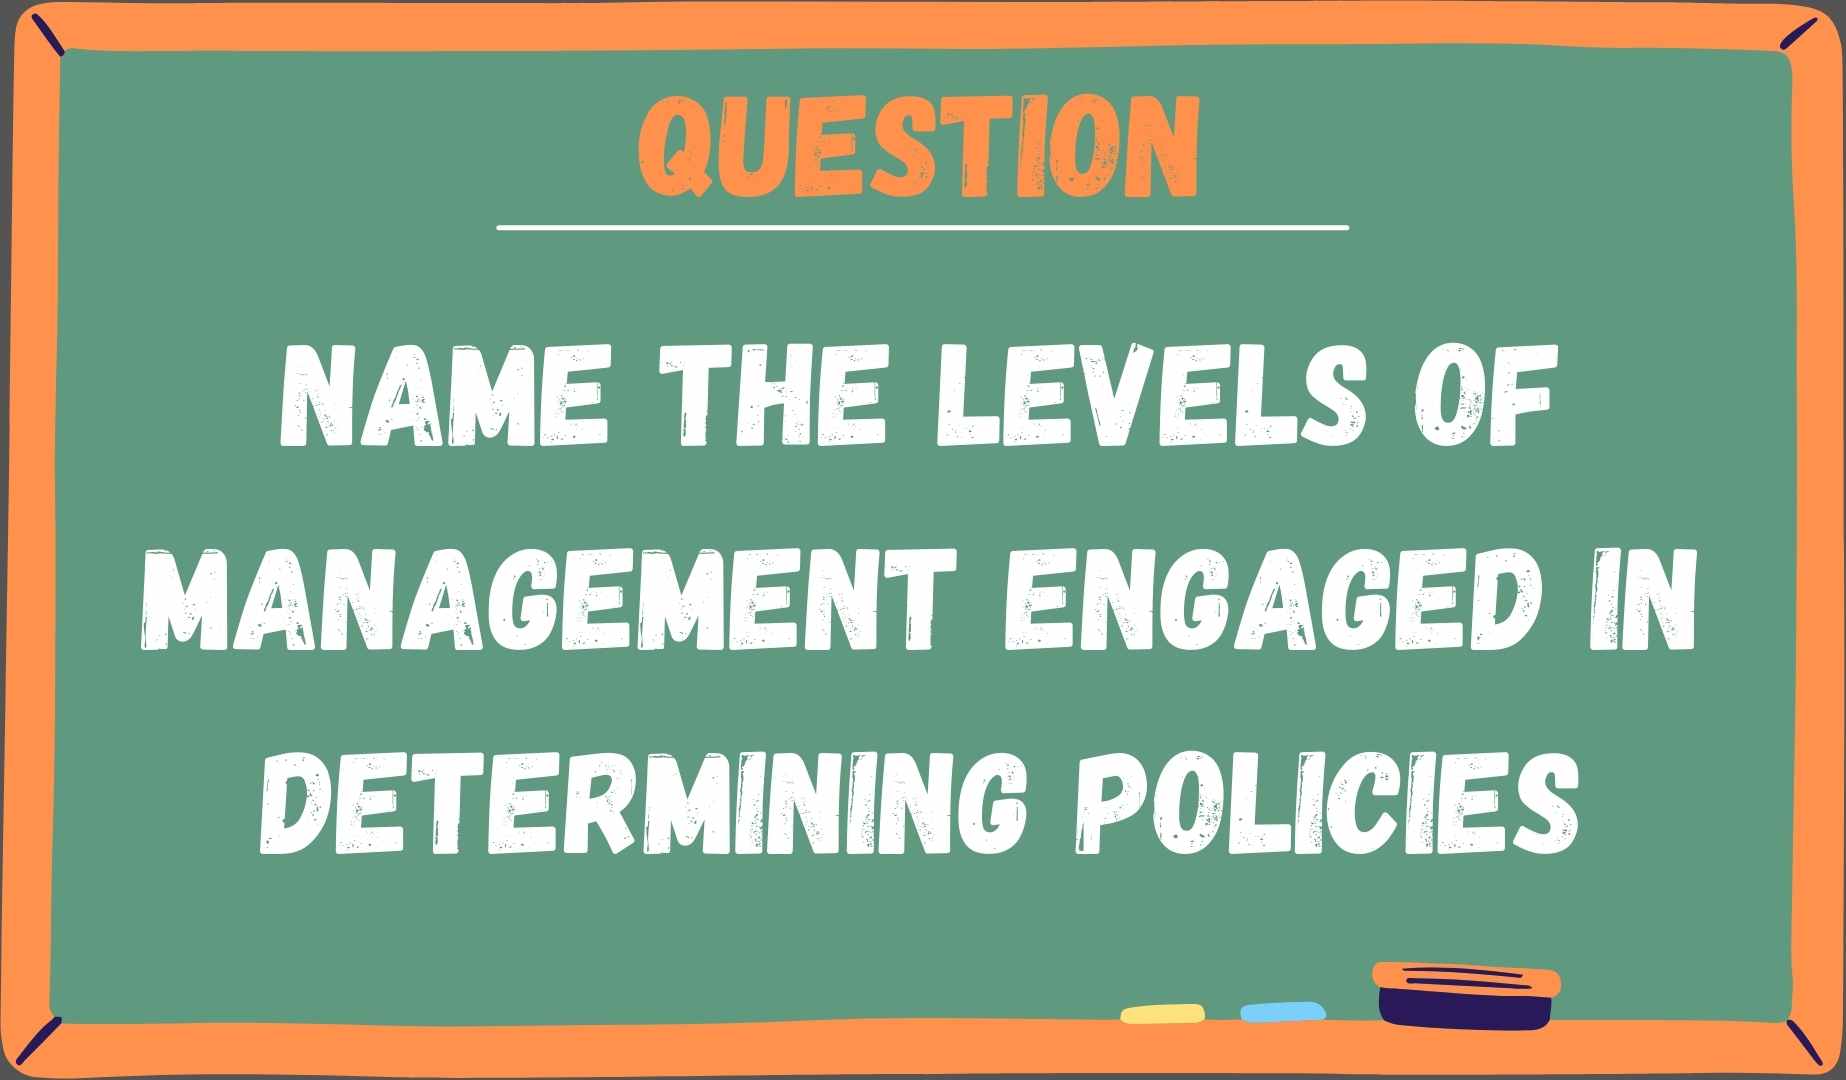 Name the Levels of management engaged in Determining Policies